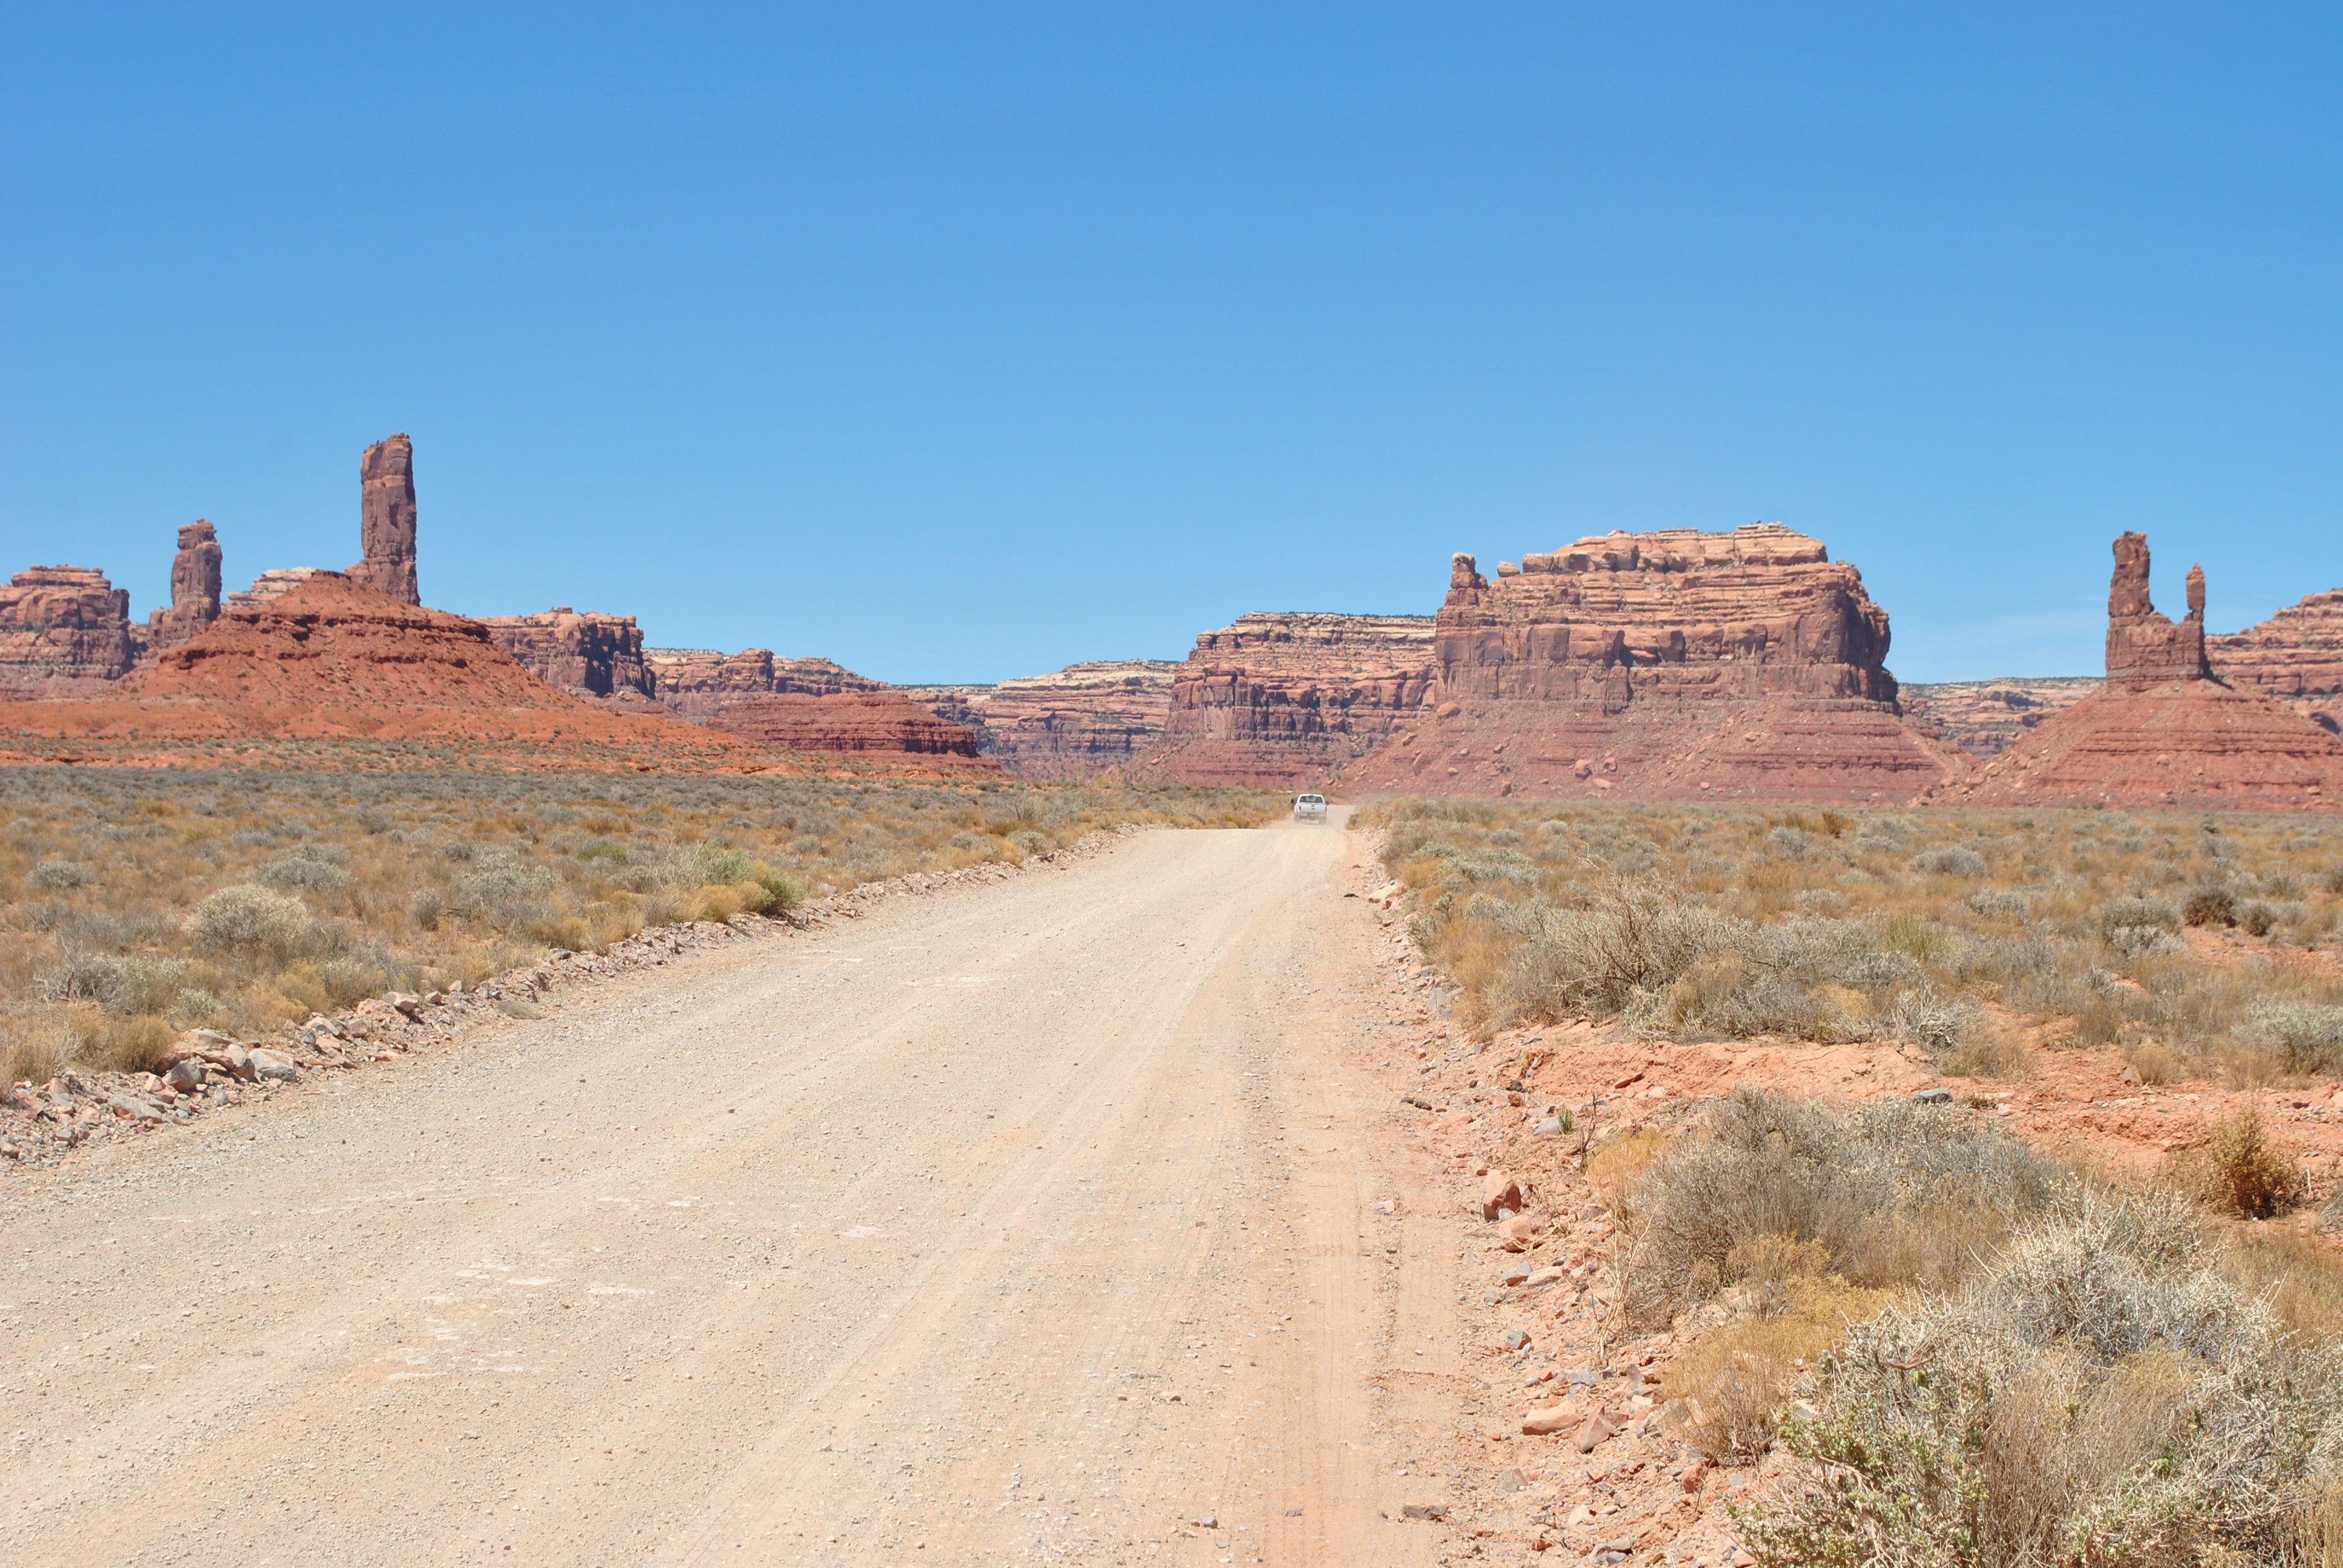 Valley of the Gods is about a 5 minute drive up the road.  There is more dispursed camping here!